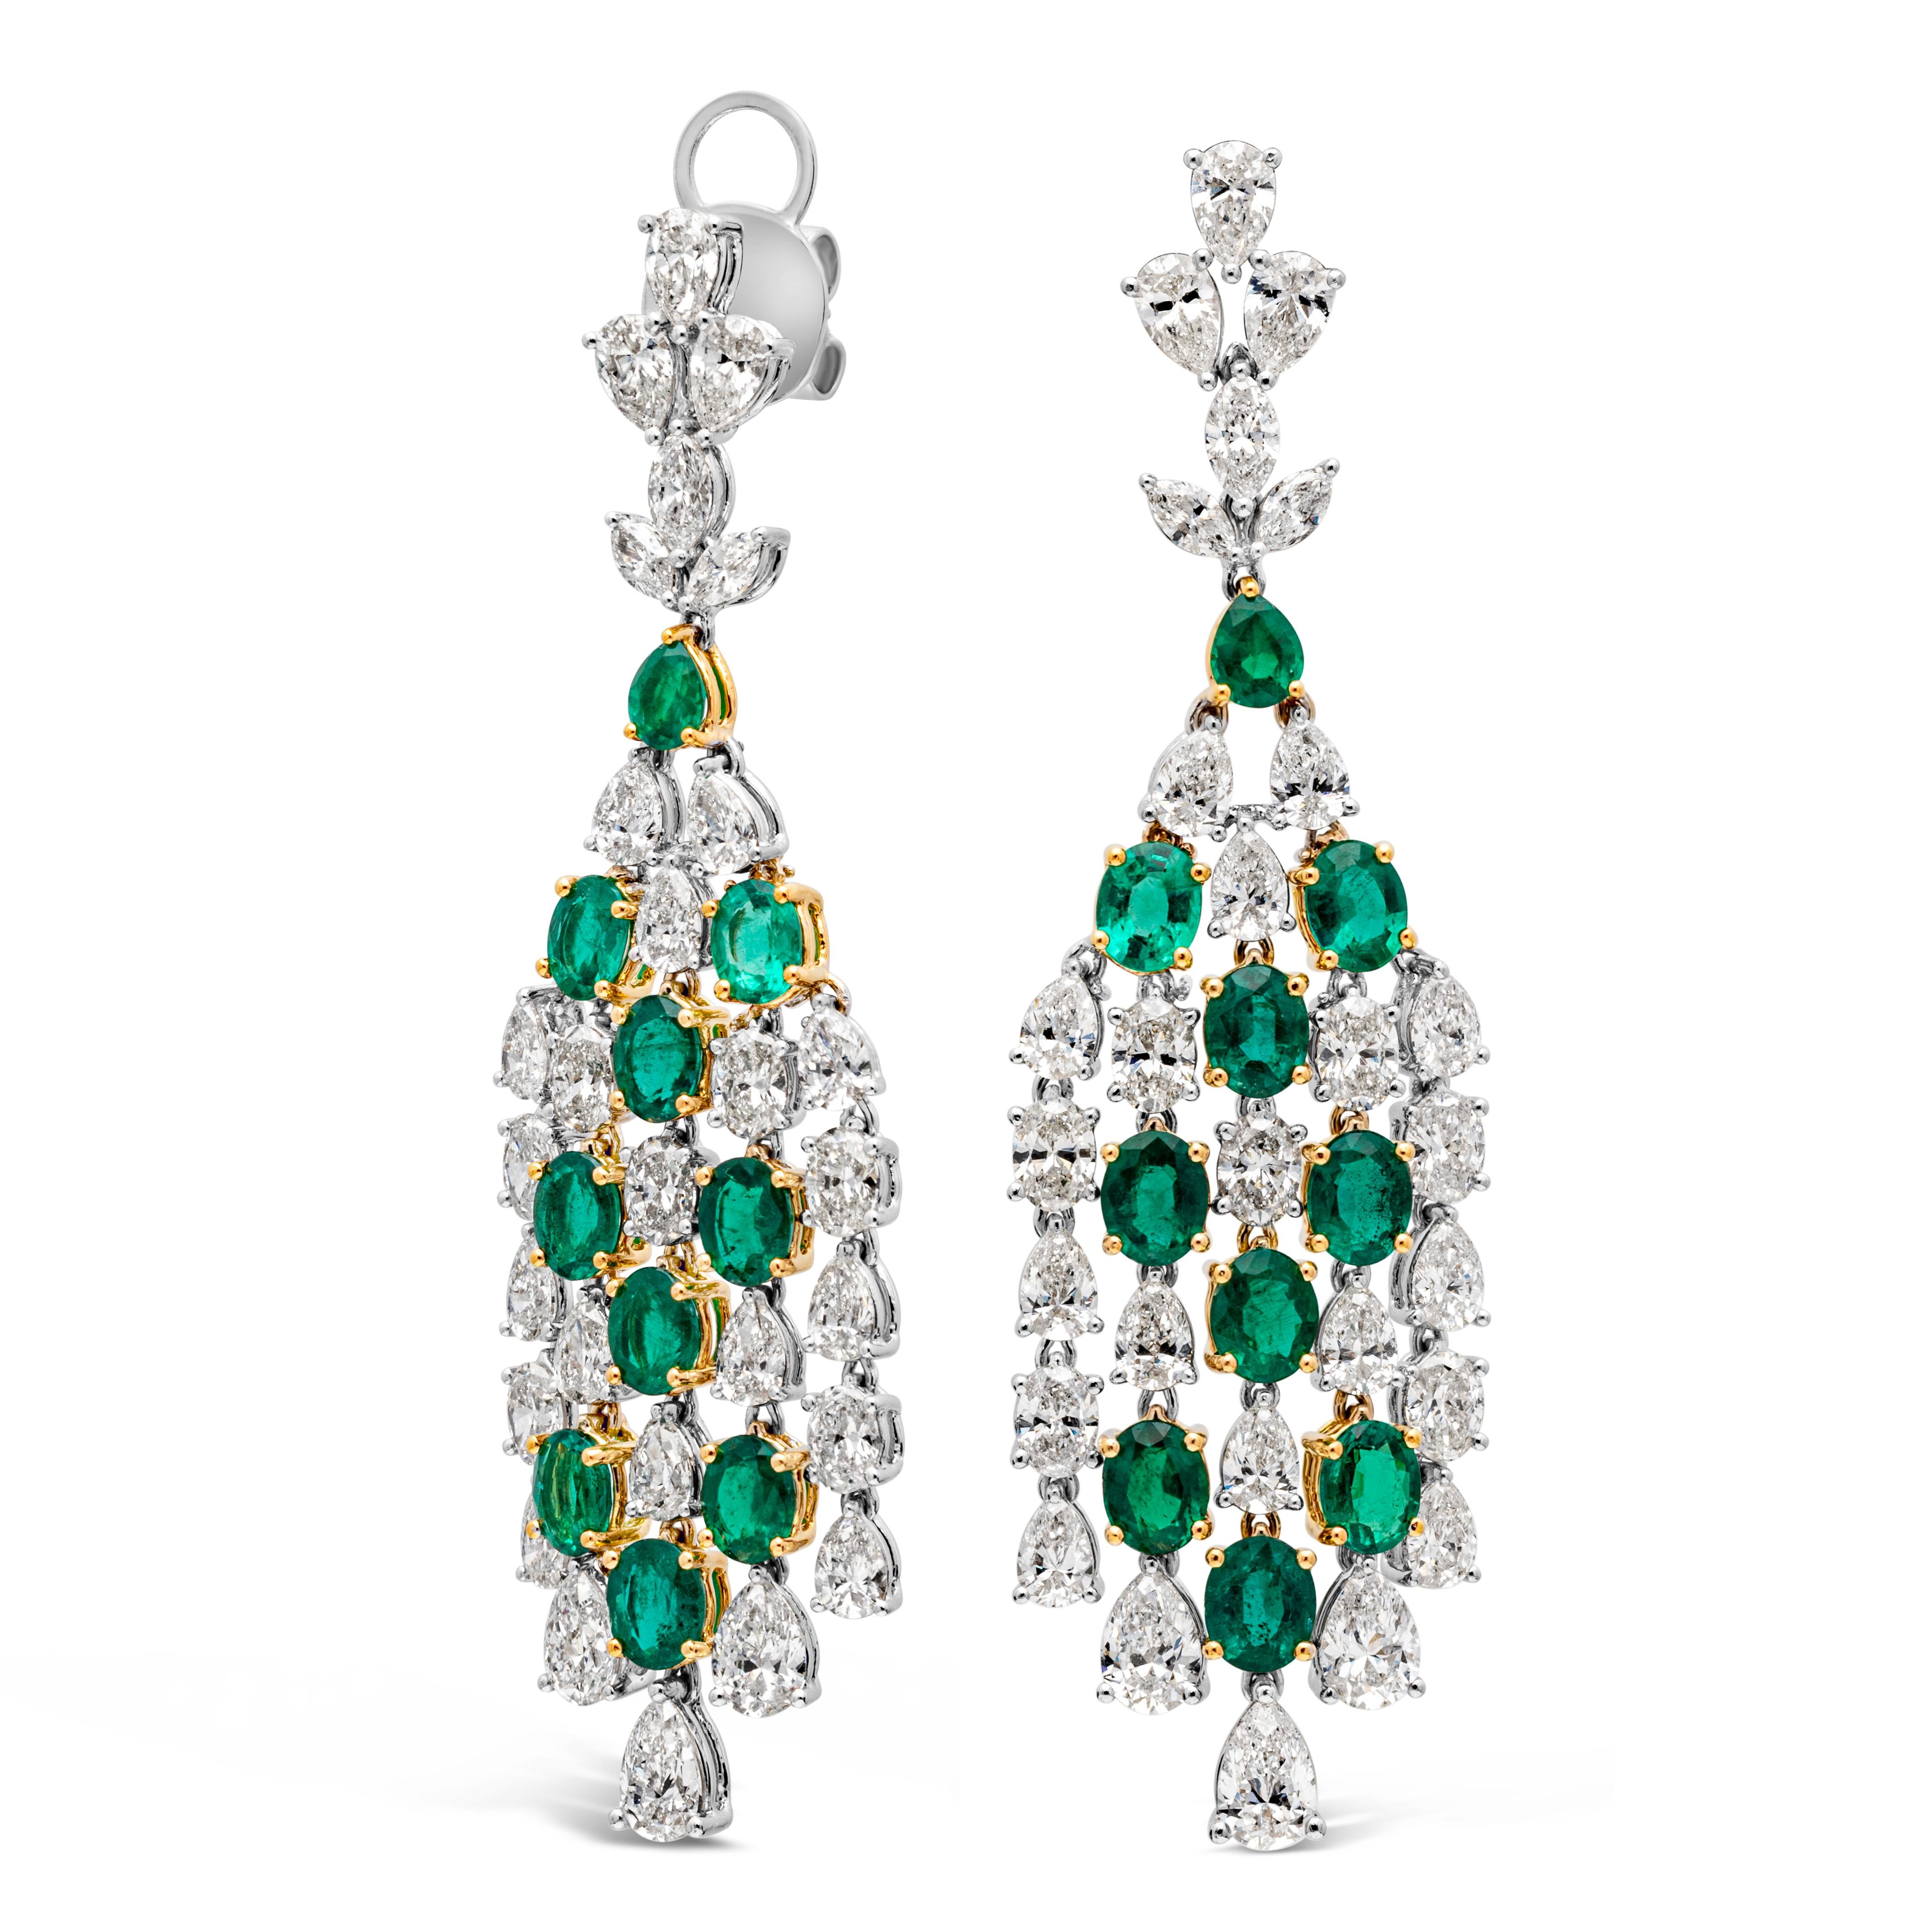 A delicate and exquisite pair of chandelier earrings showcasing 5.92 carats total of 18 oval cut and 1 pear shape color-rich green emerald, set in an elegant dangling waterfall design with 8.92 carats total of brilliant oval, pear and marquise cut